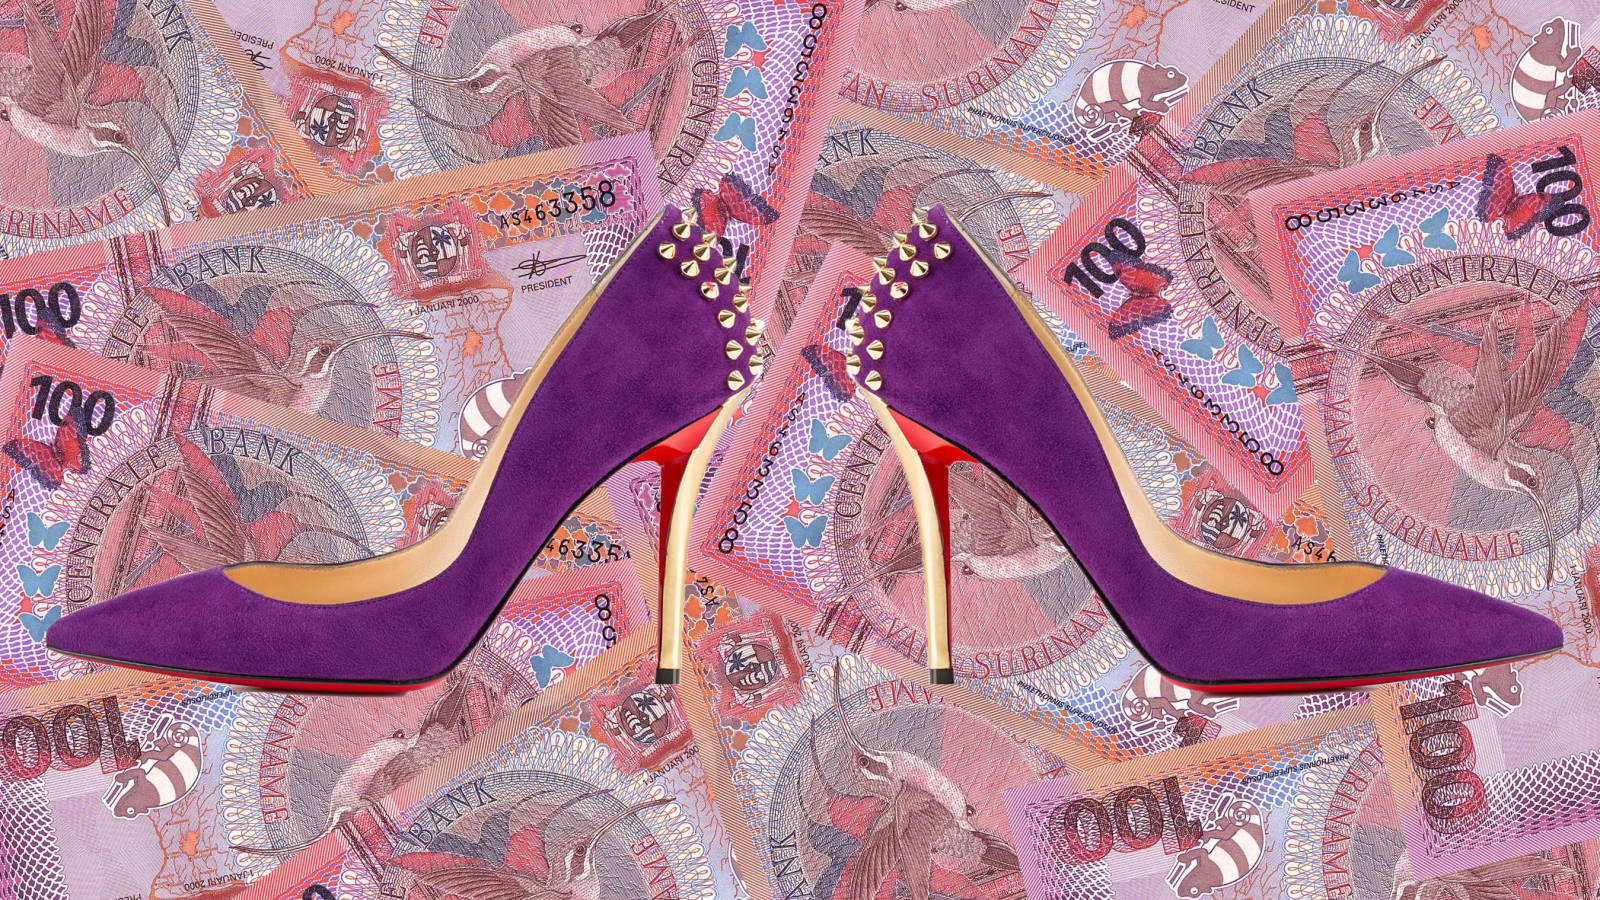 Christian Louboutin Is 'Vaguely Horrified' by How Some People Wear